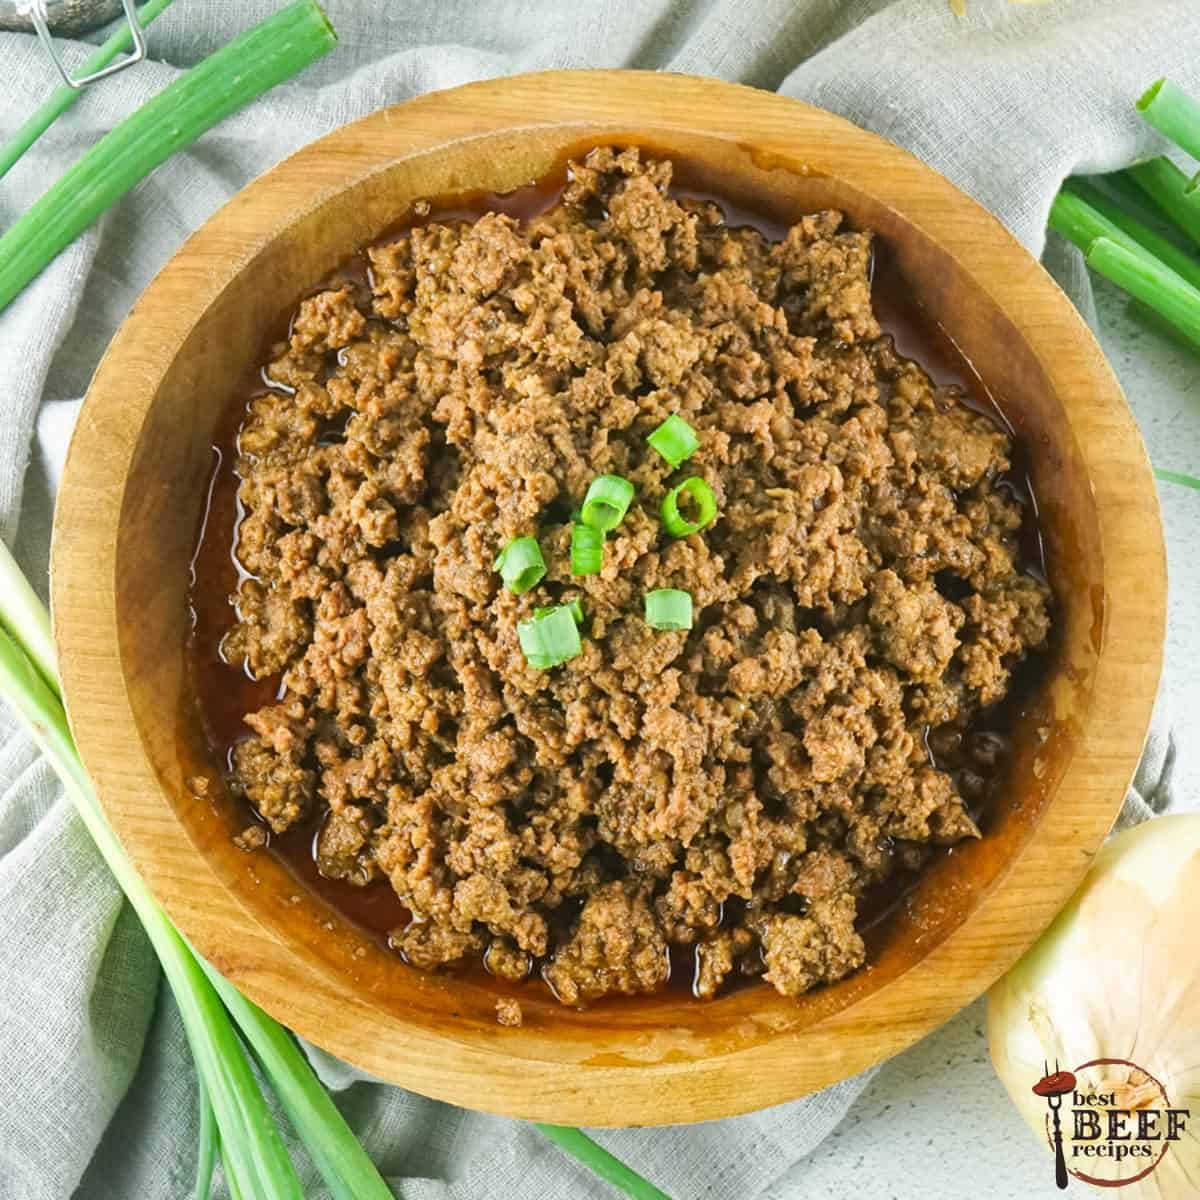 https://bestbeefrecipes.com/wp-content/uploads/2023/06/how-to-cook-ground-beef-on-the-stove-hero.jpg